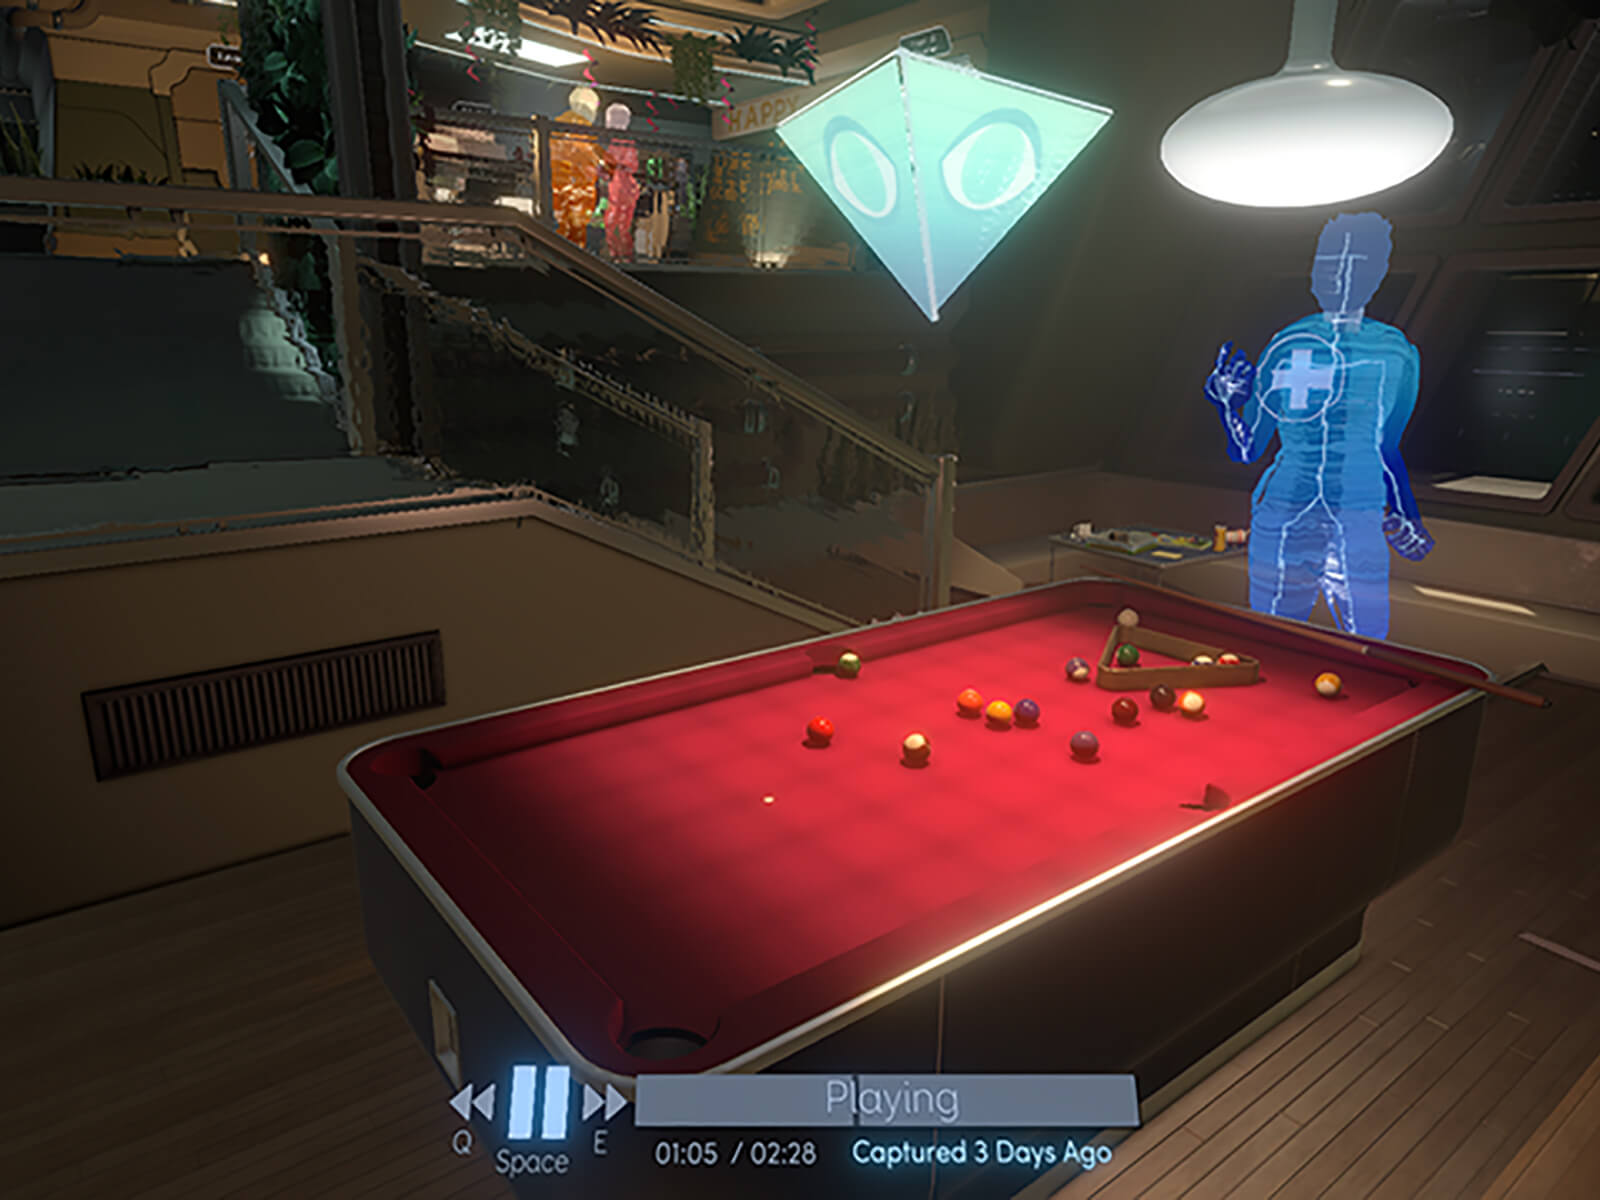 A faceless character plays pool in this screenshot from the Fullbright's Company's game Tacoma